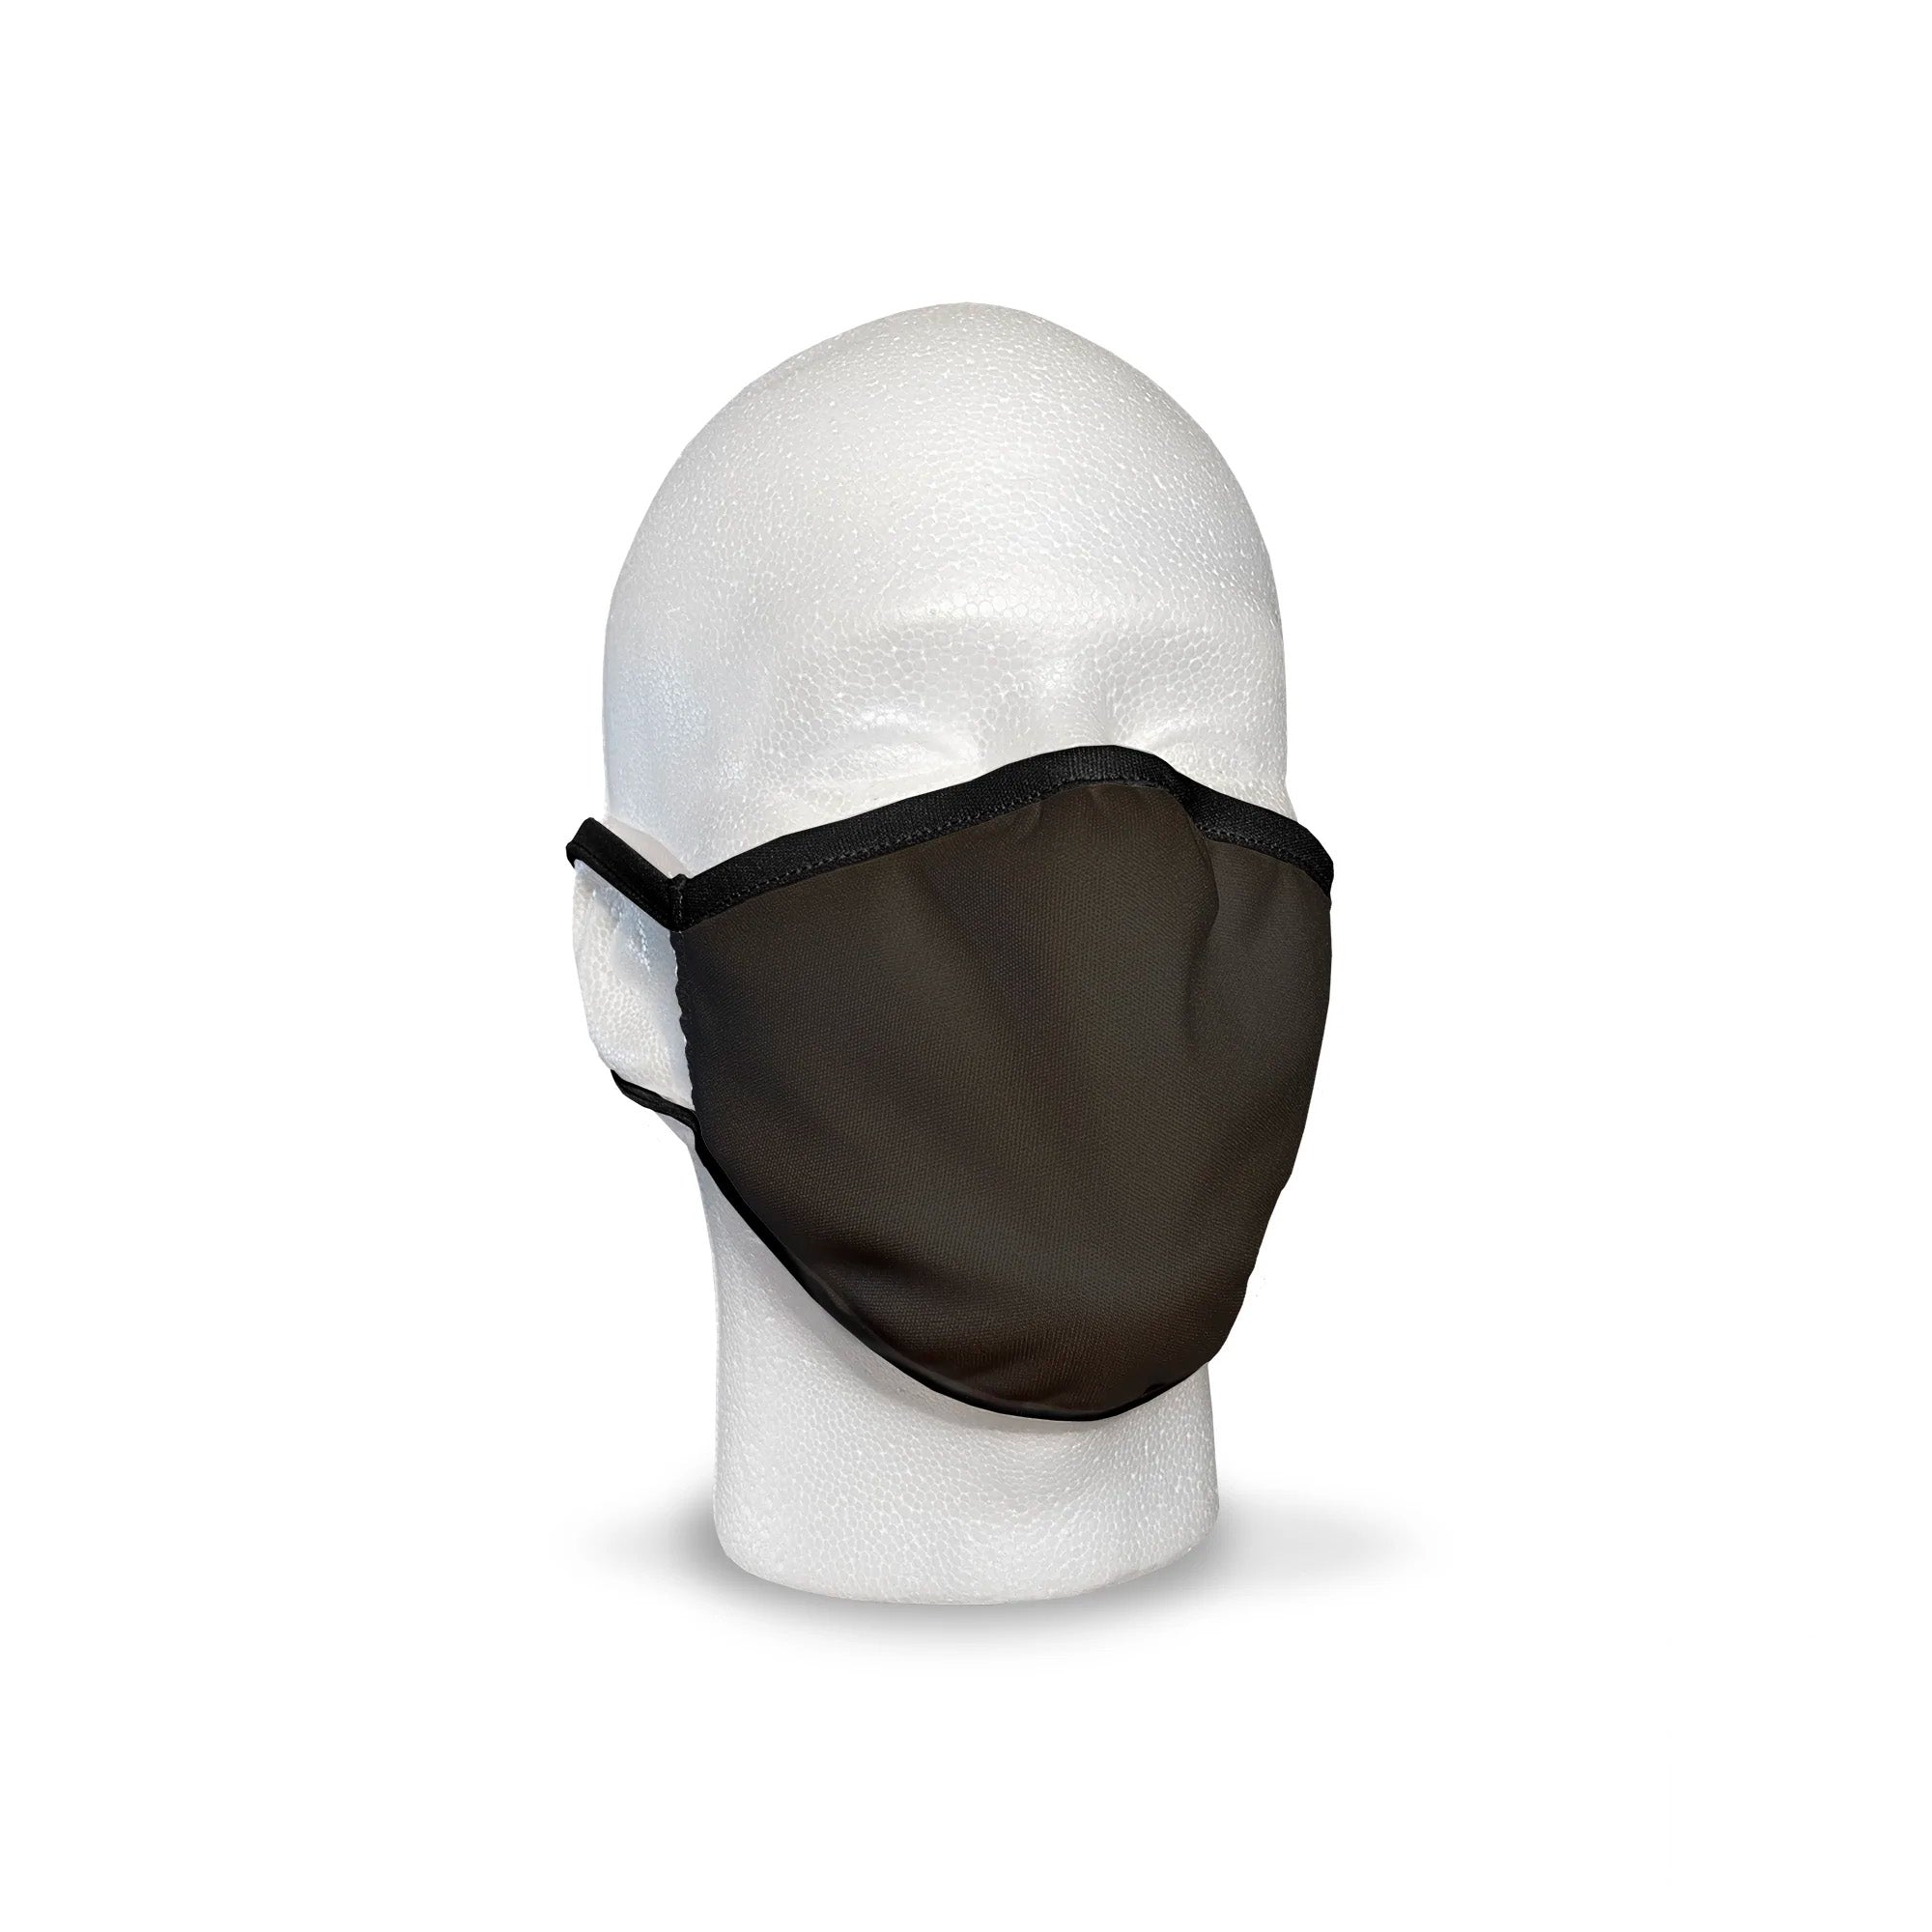 The Plain Black 3-Layer Personal Protective Face Mask